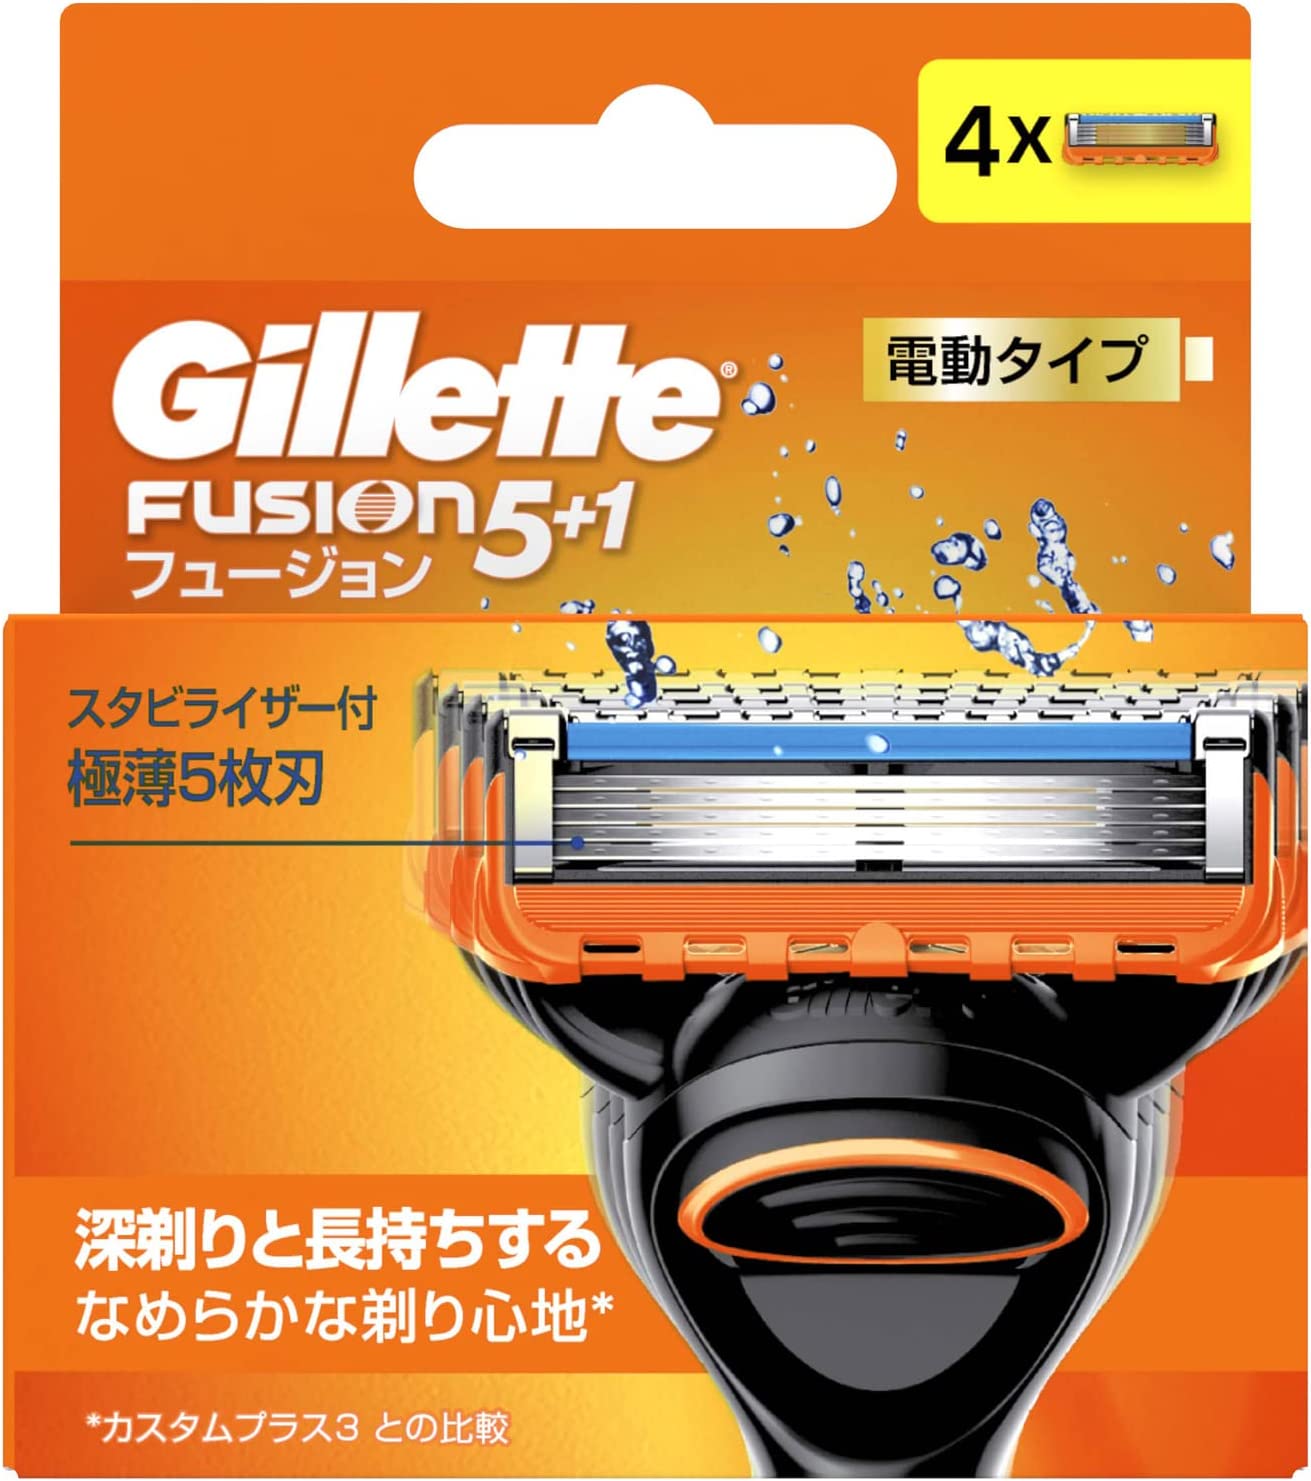 Gillette Fusion 5+1, Electric type, Blade 4B